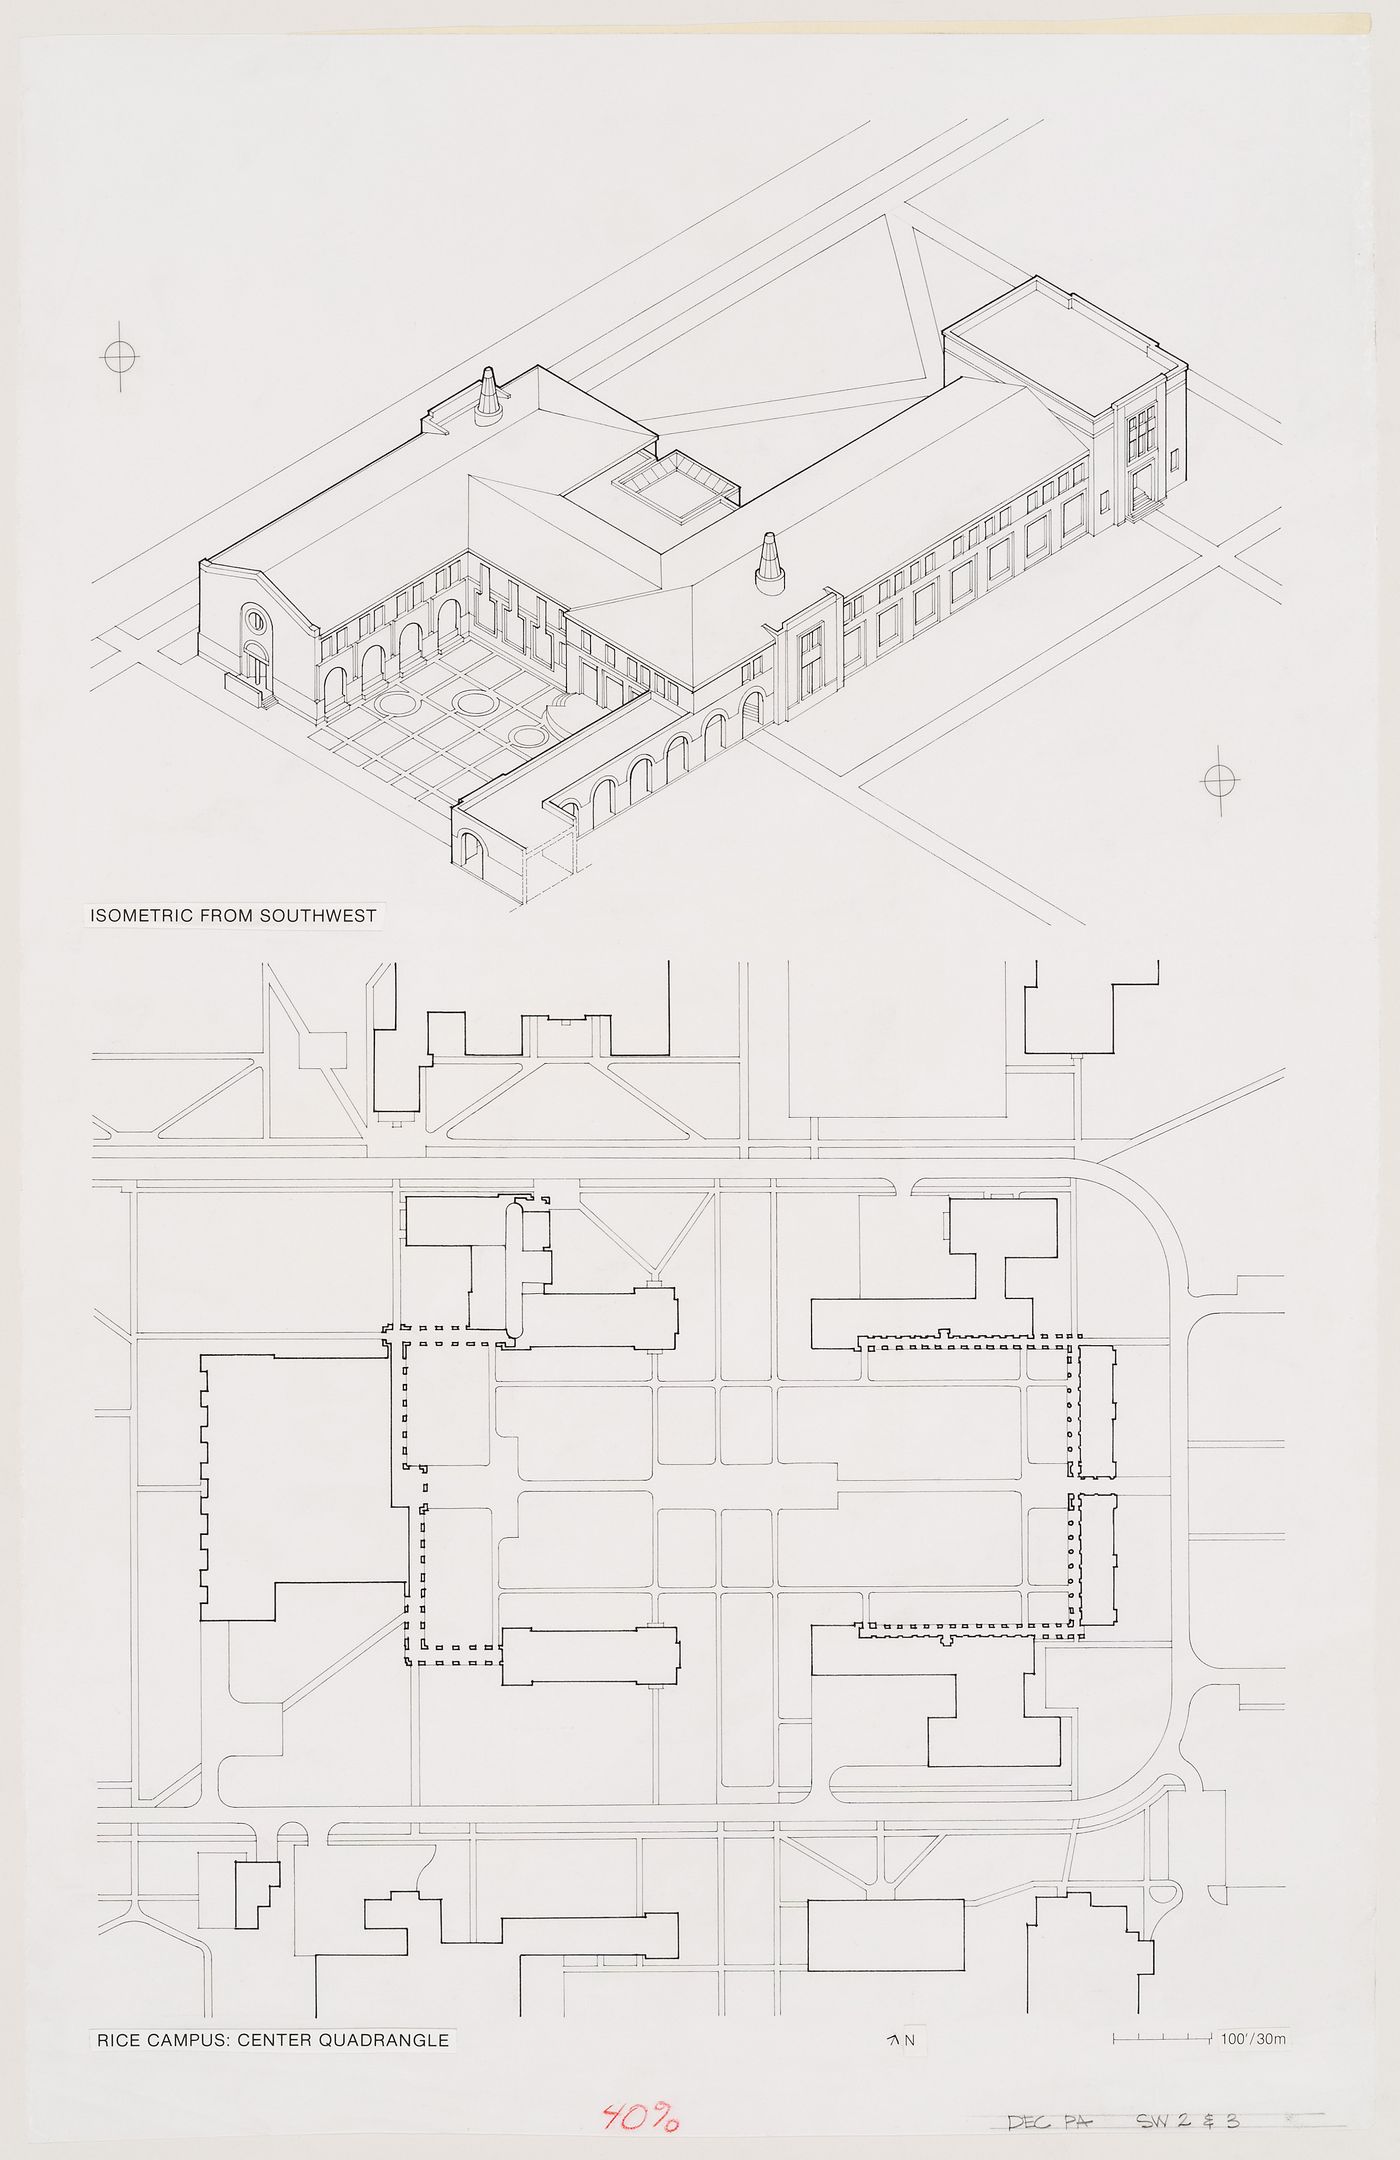 School of Architecture Addition, Rice University, Houston, Texas: plan and axonometric from southwest